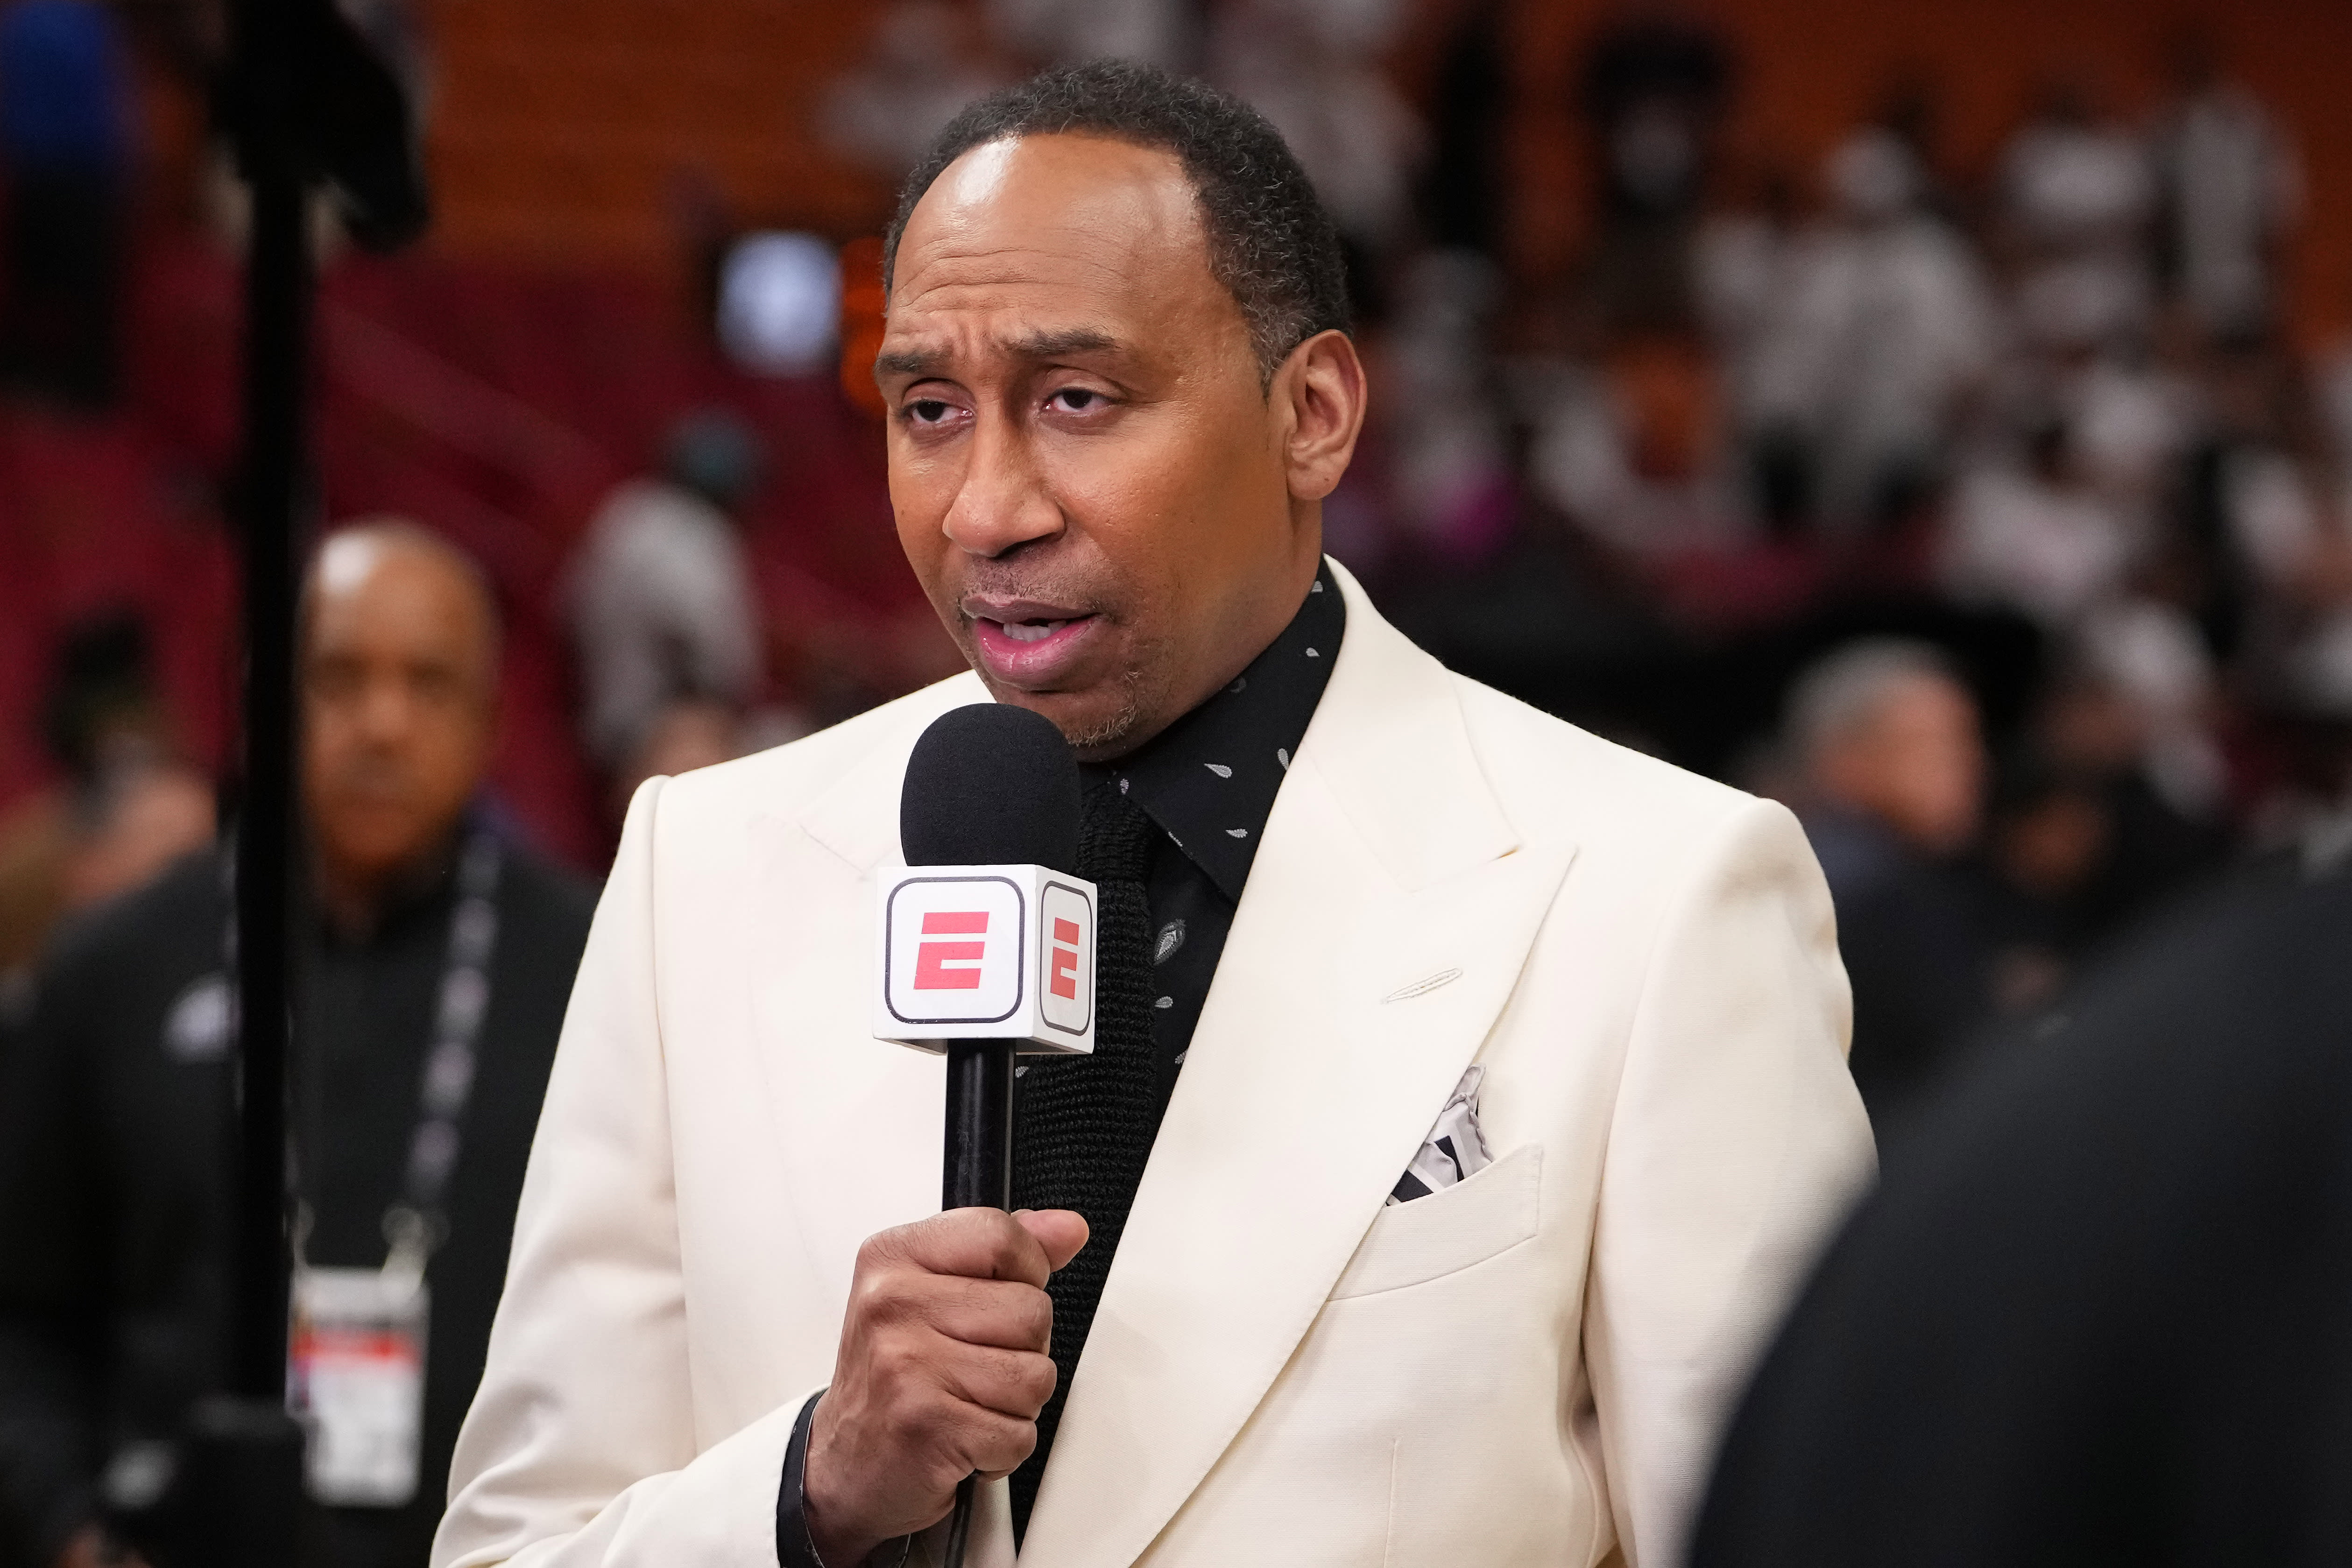 Stephen A. Smith responds, displeased with Lonzo Ball's video response